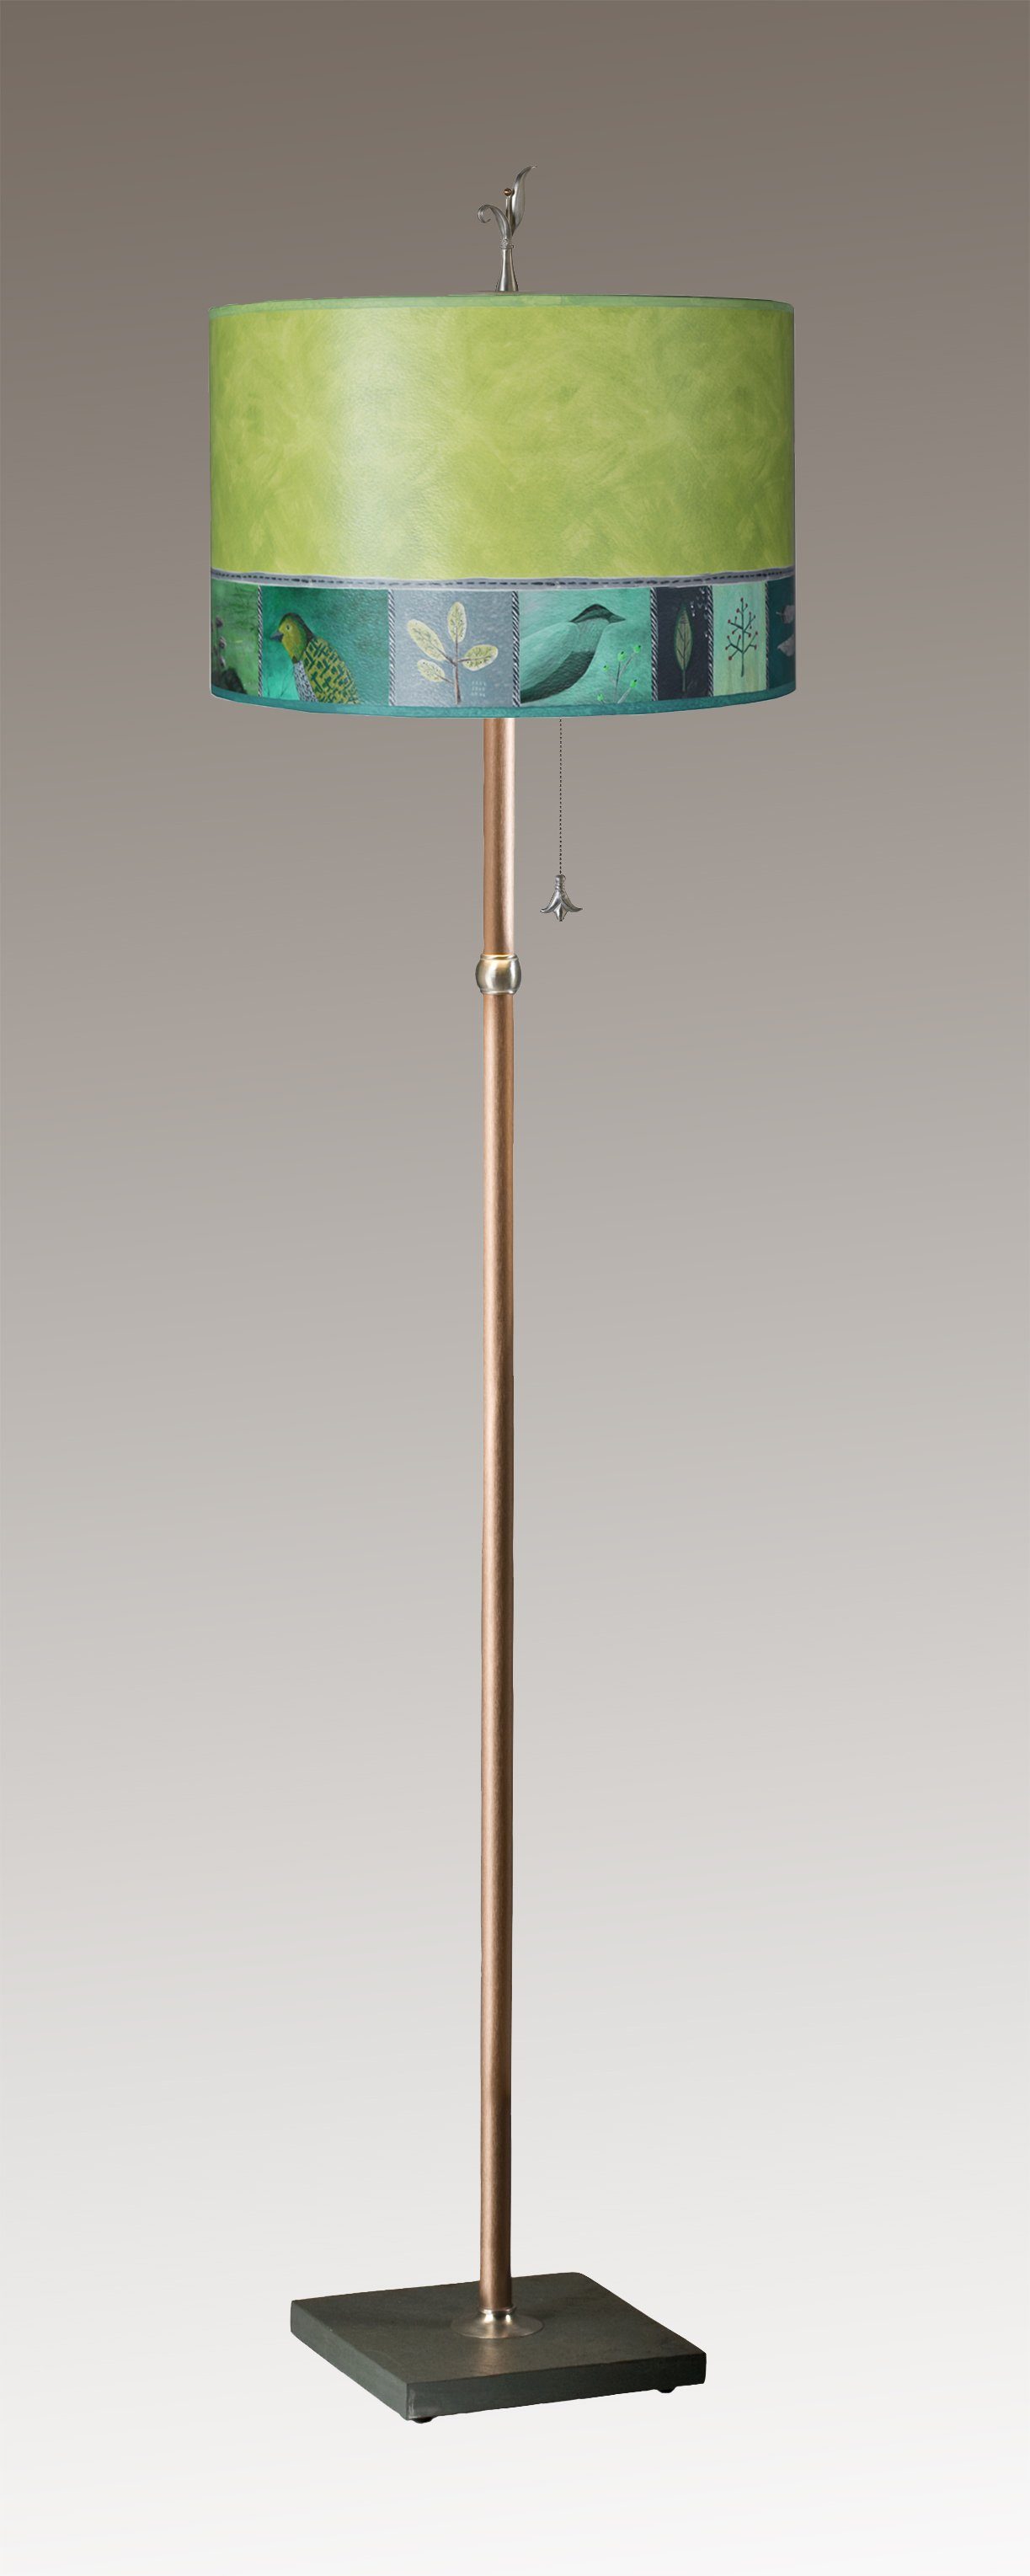 Janna Ugone & Co Floor Lamps Copper Floor Lamp with Large Drum Shade in Woodland Trails in Leaf